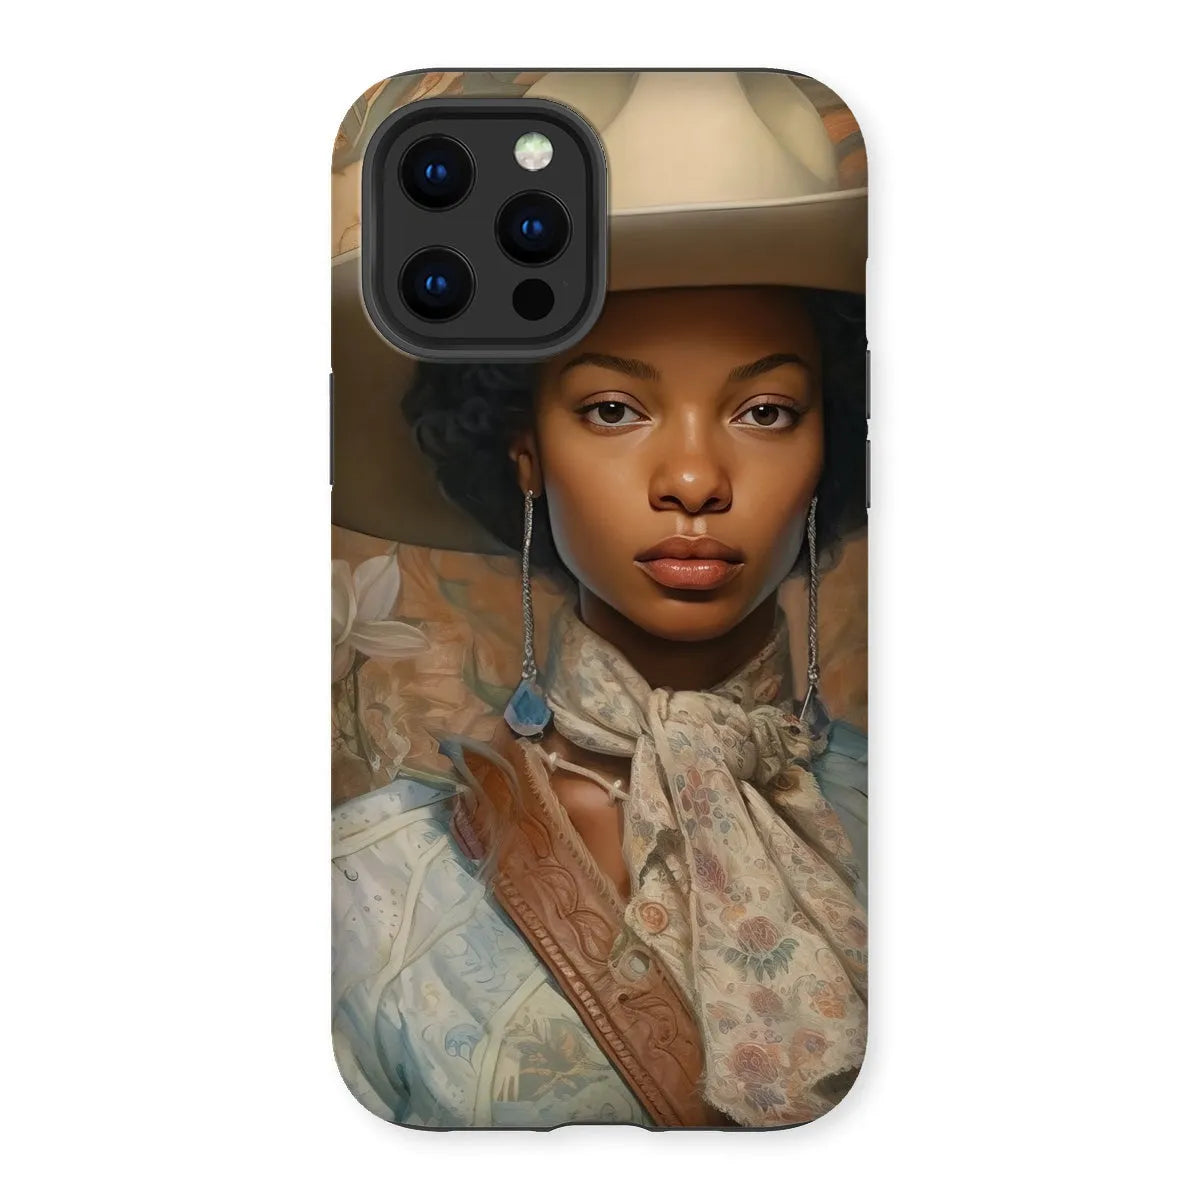 Imani The Lesbian Cowgirl - Sapphic Art Phone Case - Iphone 12 Pro Max / Matte - Mobile Phone Cases - Aesthetic Art